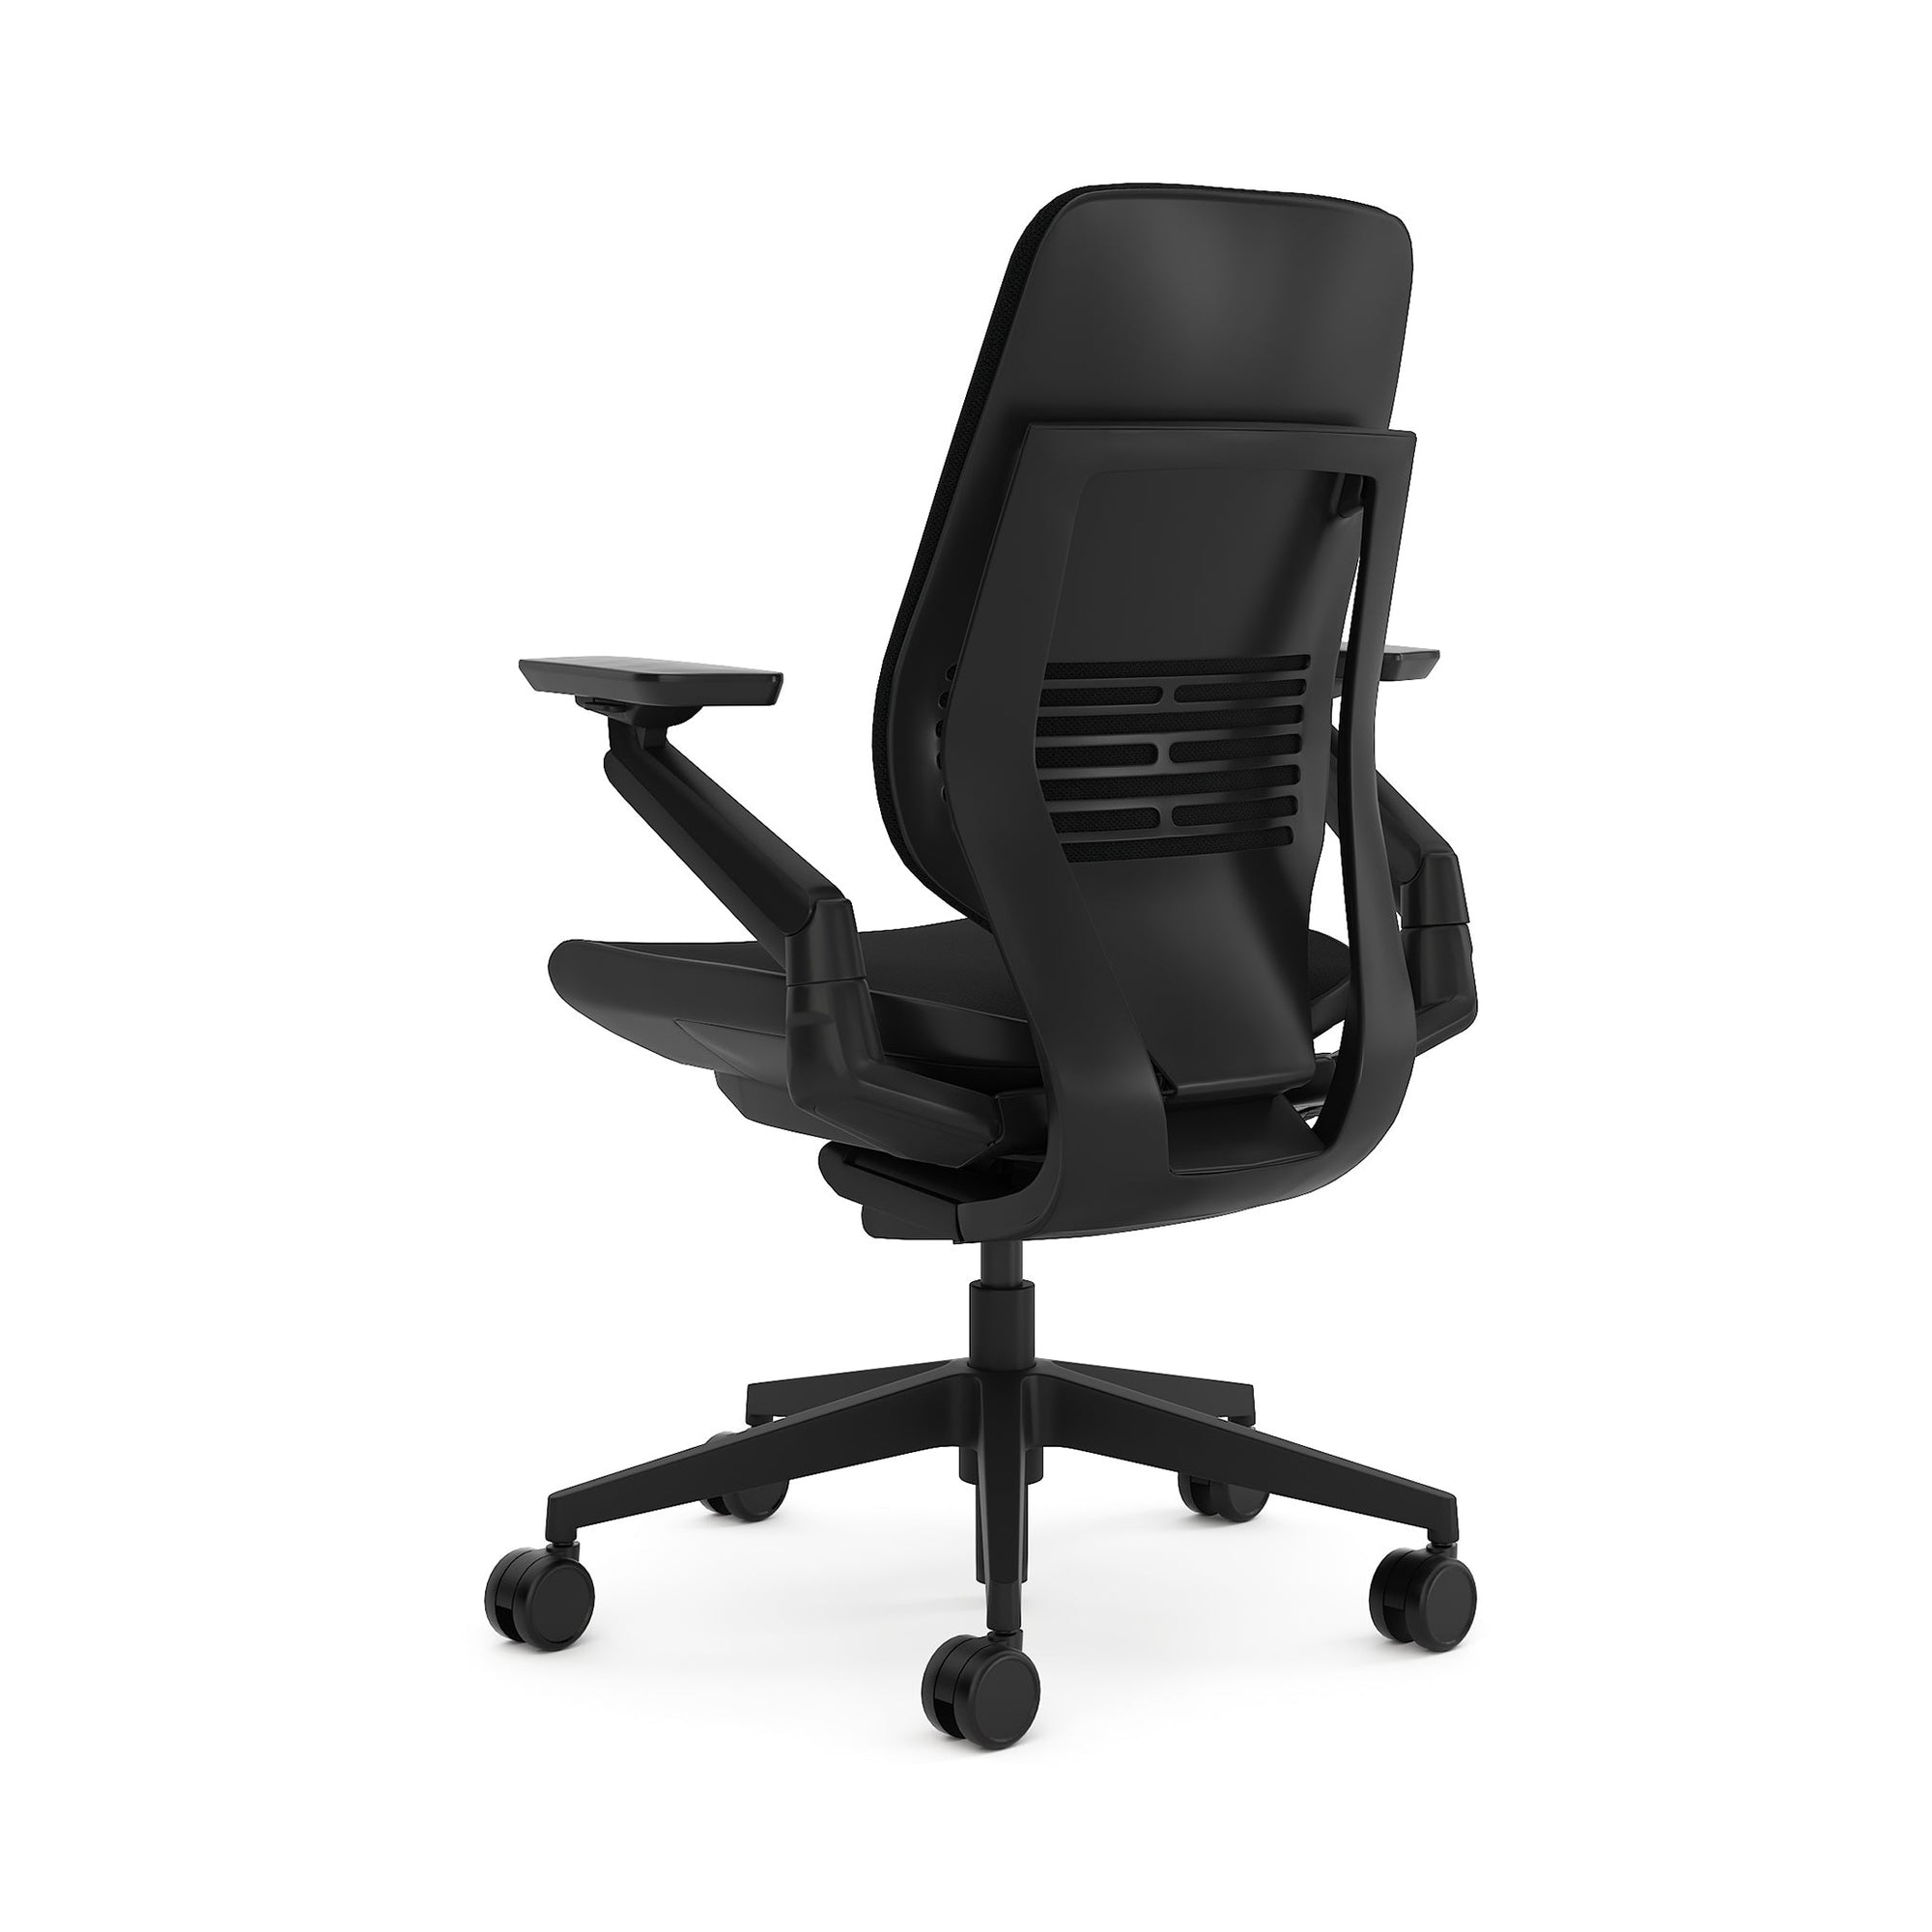  Steelcase Gesture Office Chair - Ergonomic Work Chair with  Wheels for Hard Flooring - Comfortable Office Chair - Intuitive-to-Adjust  Chairs for Desk - 360-Degree Arms - Licorice Fabric, Dark Frame 